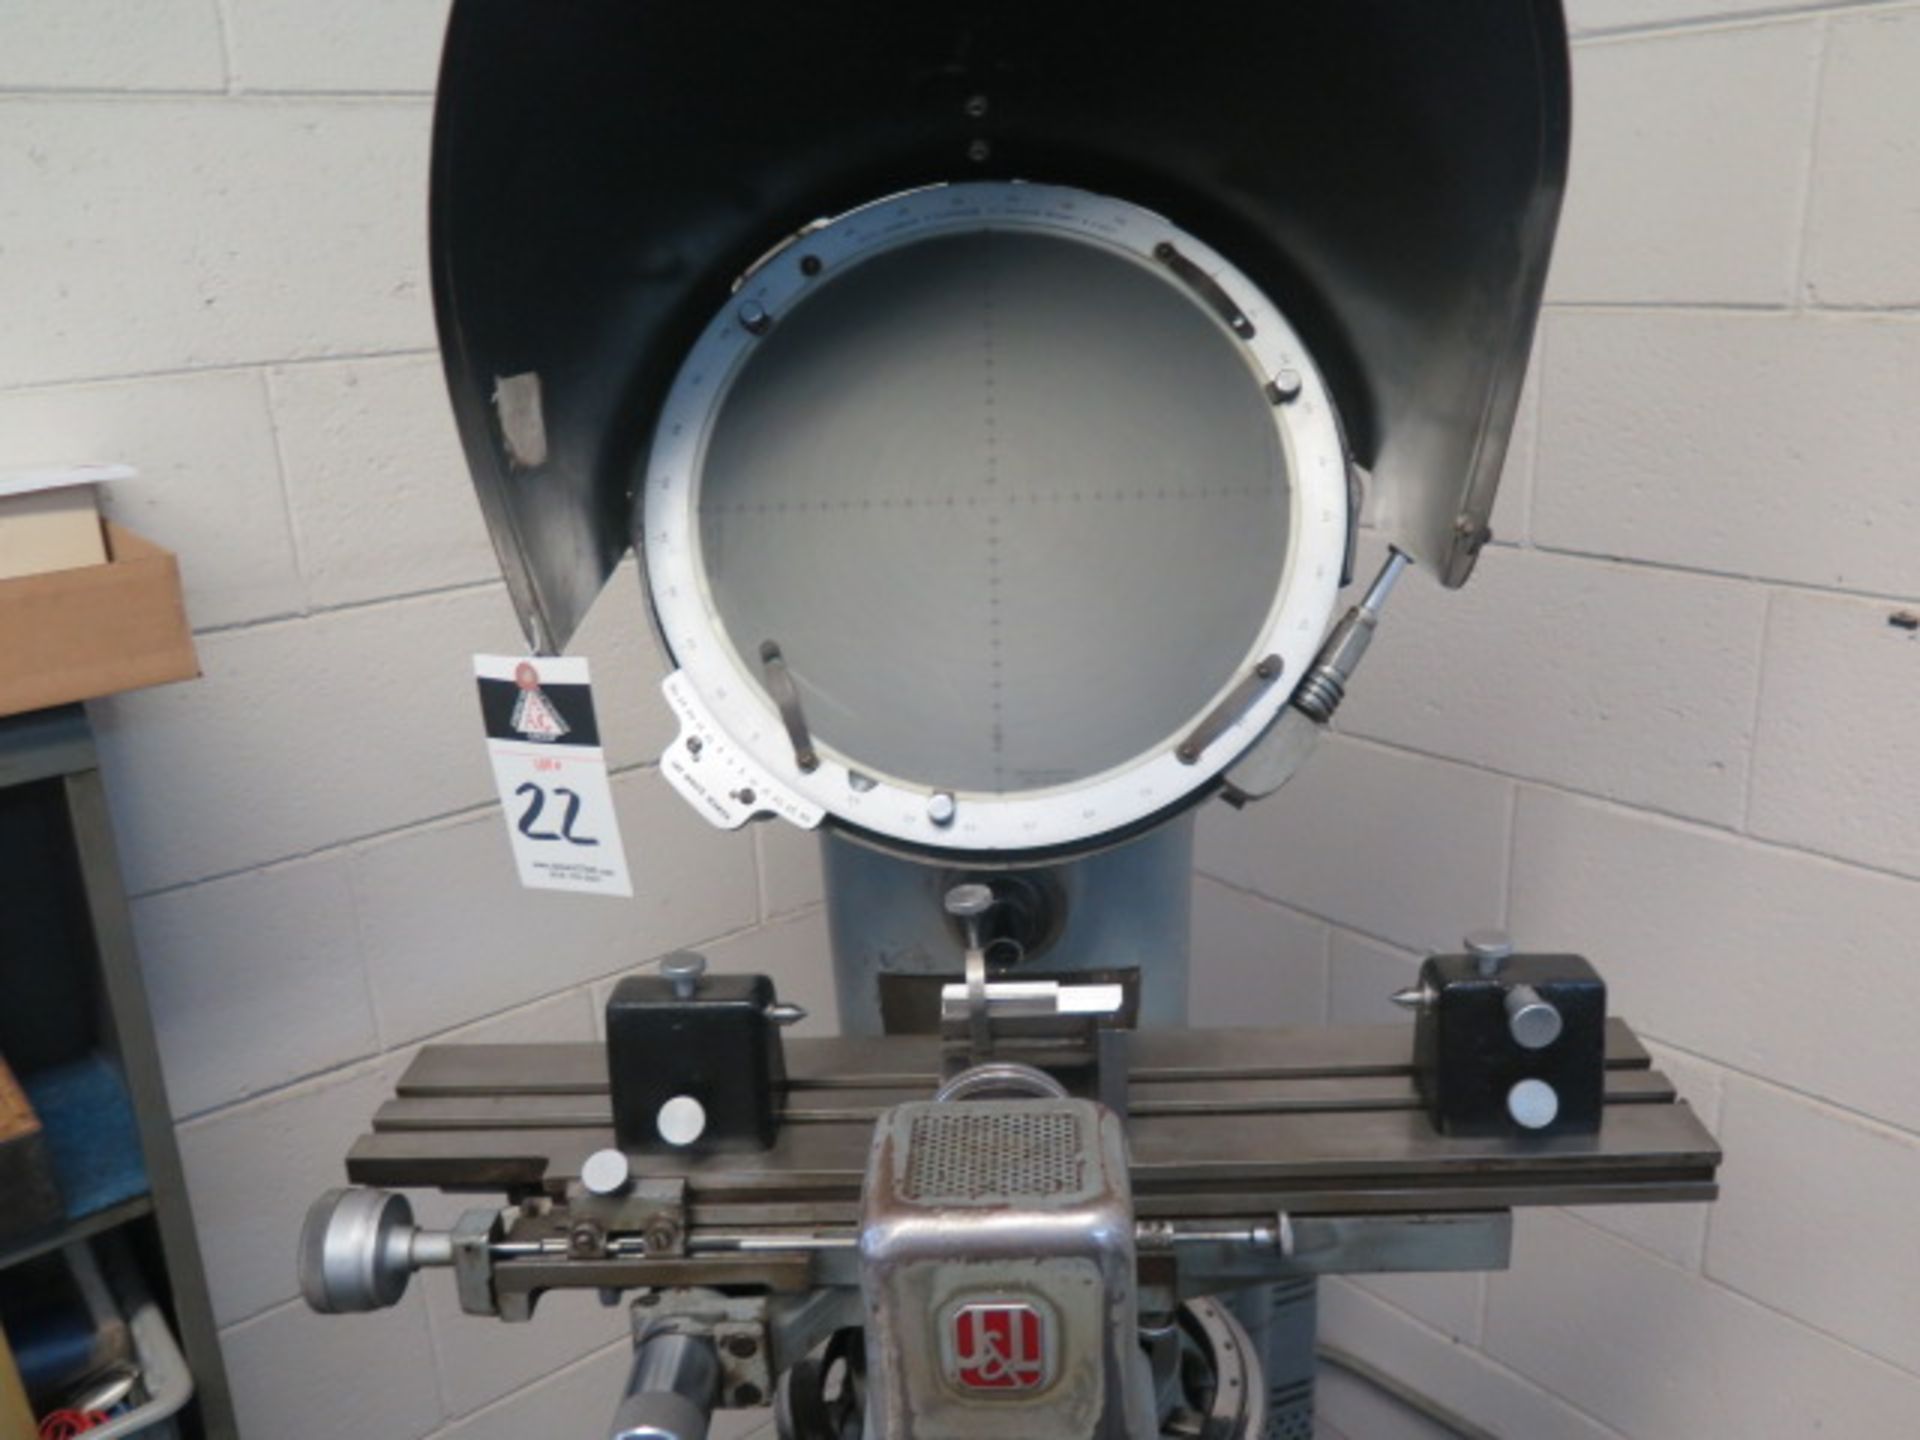 J & L mdl. PC-14 Floor Model Optical Comparator w/ 6” x 30” Table and Acces - Image 2 of 6